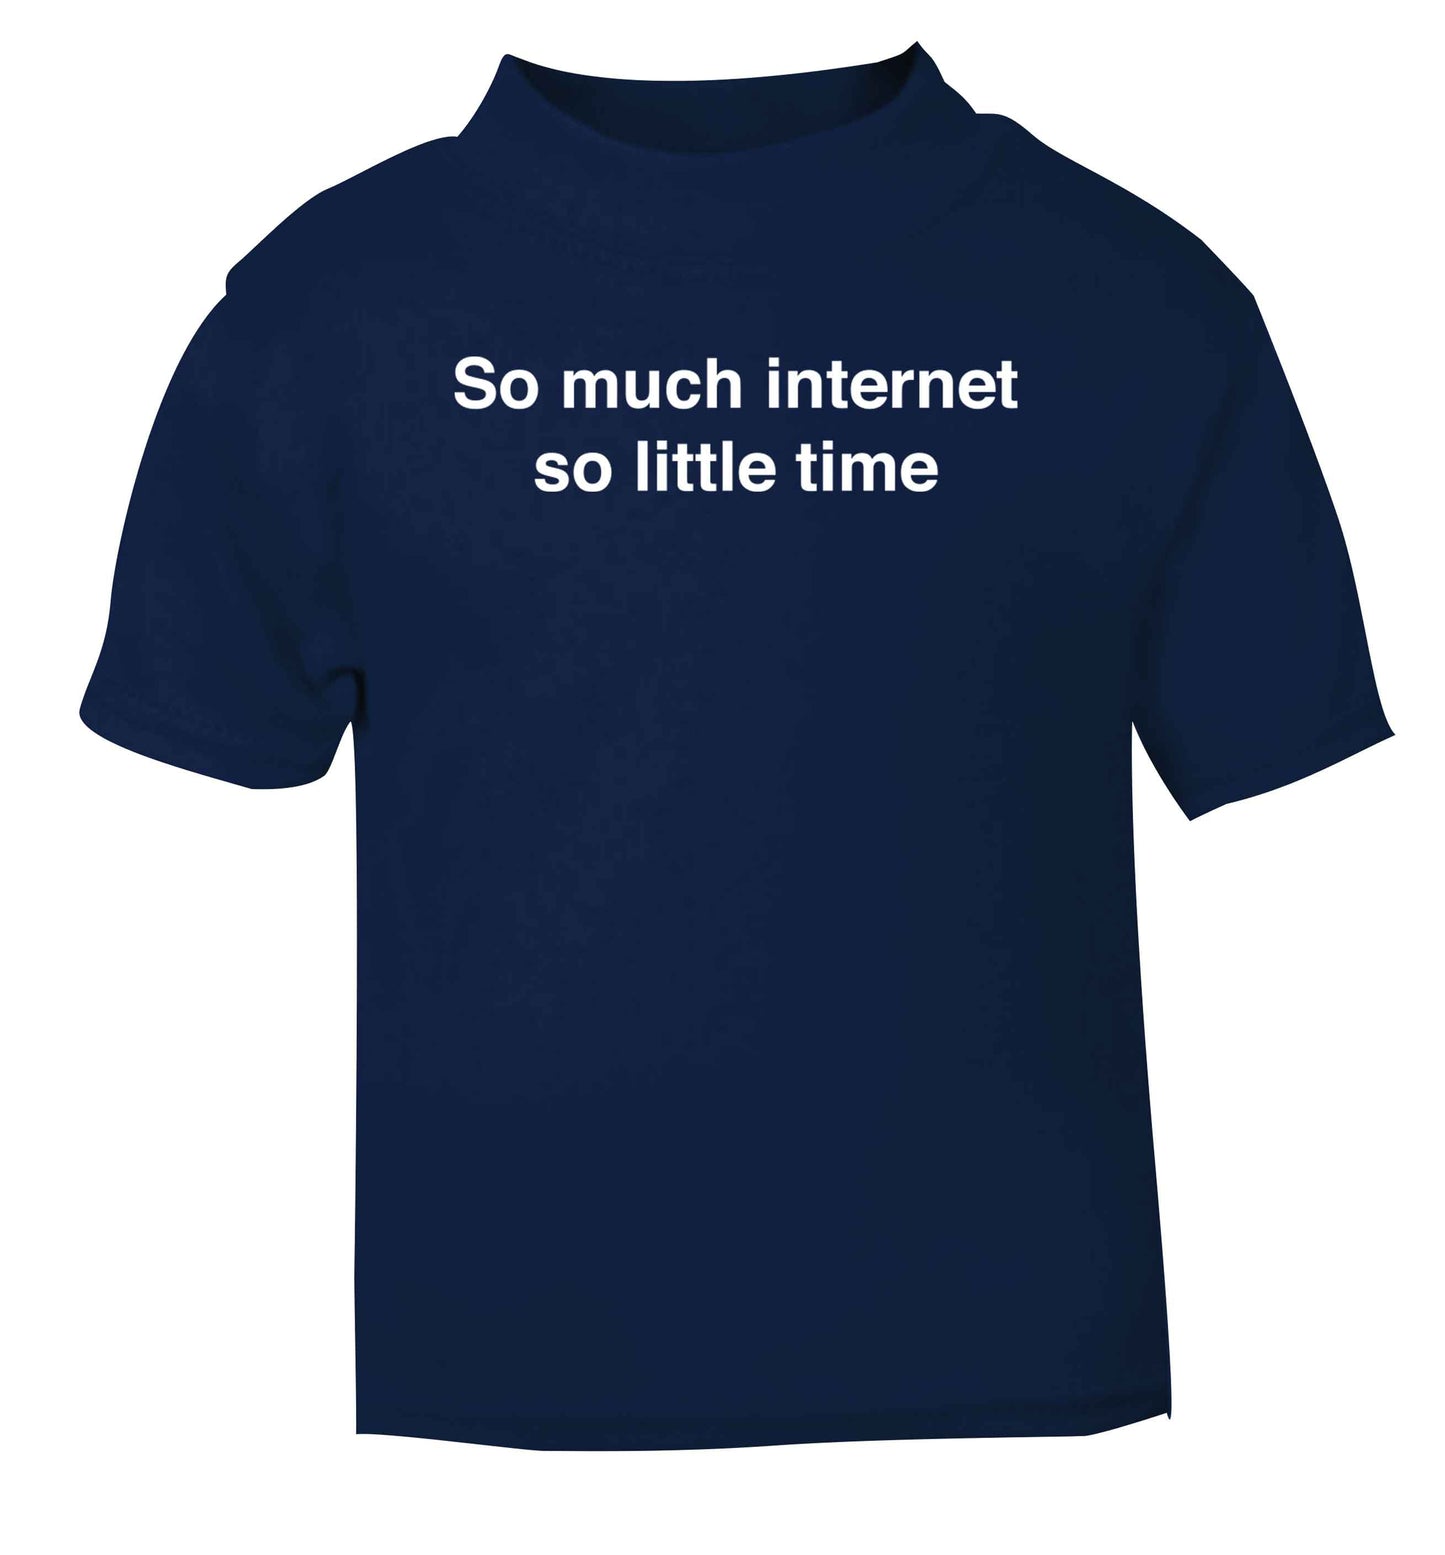 So much internet so little time navy baby toddler Tshirt 2 Years